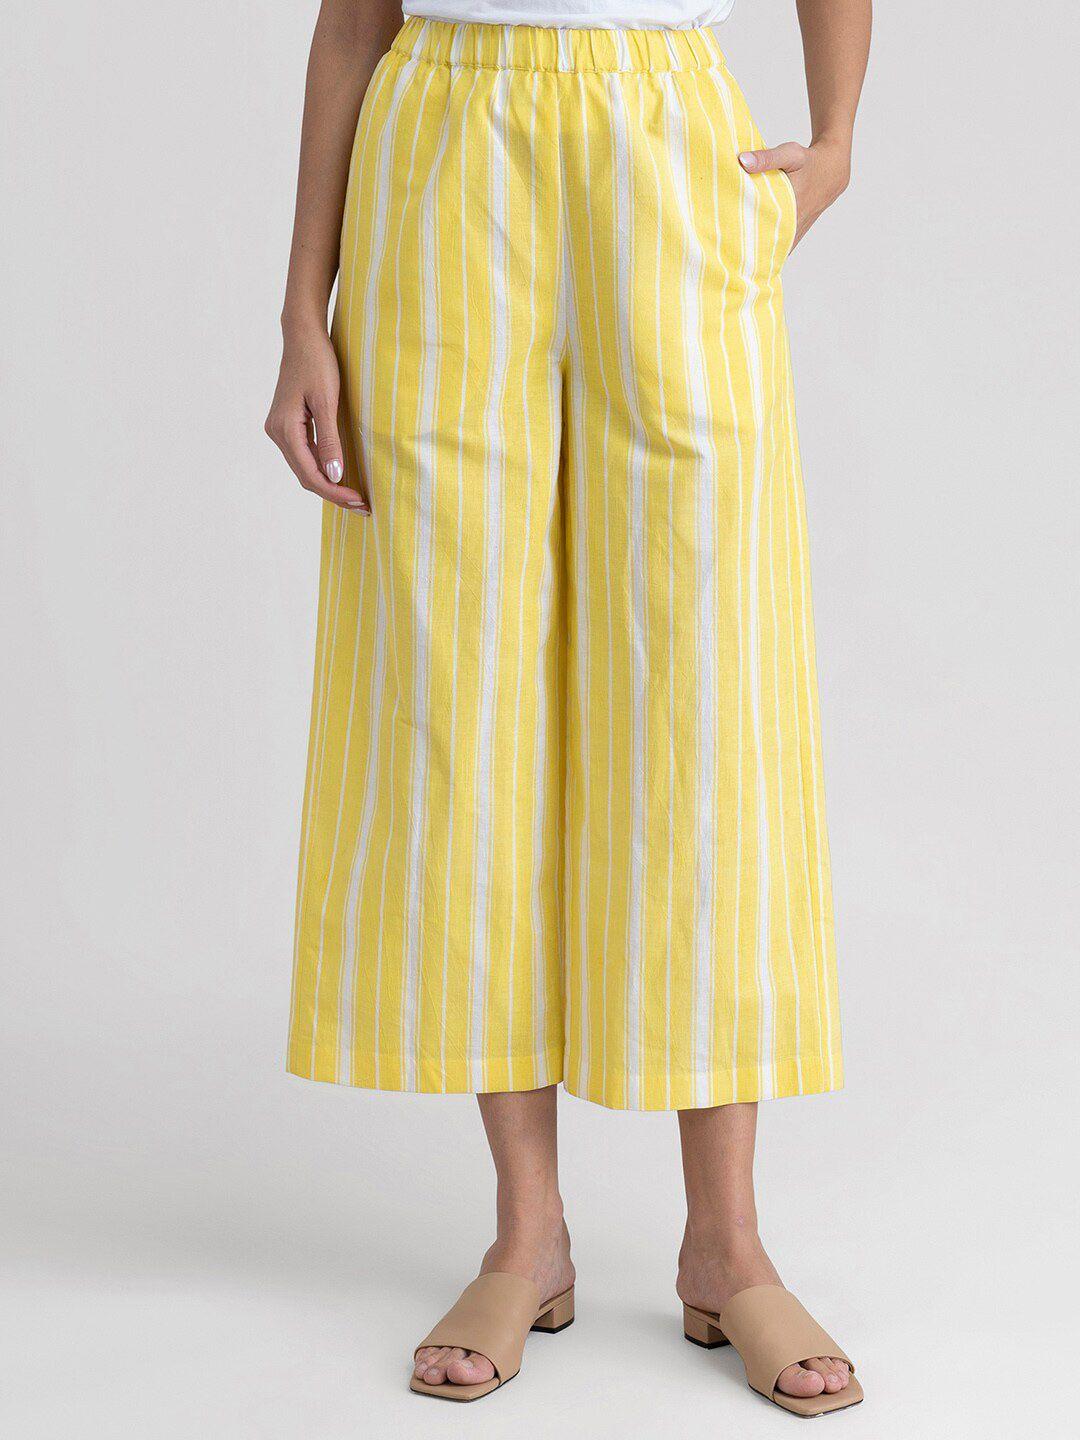 marigold by fablestreet women yellow & white striped ethnic palazzos